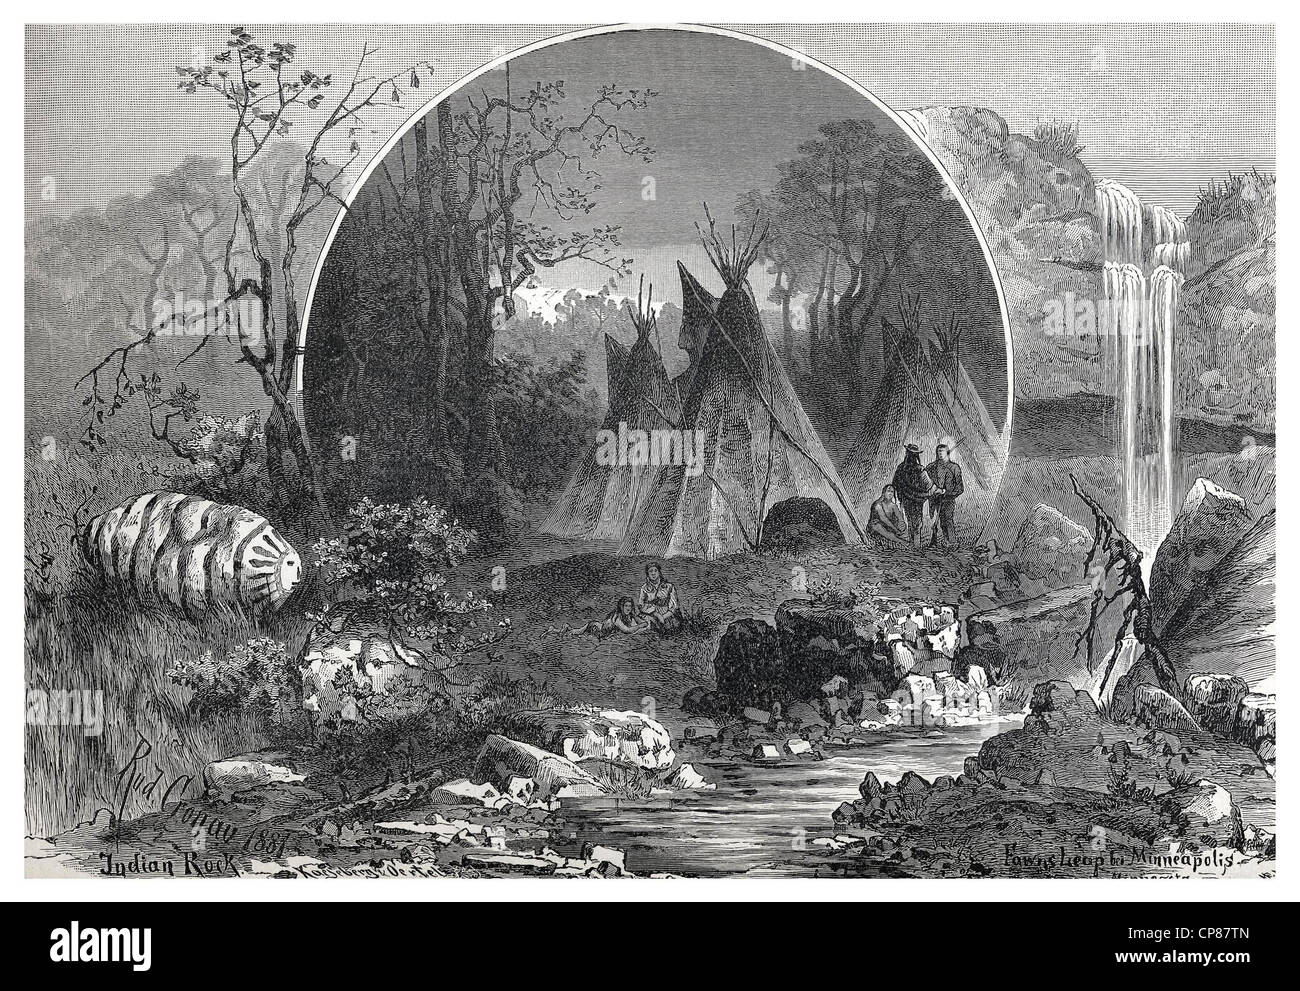 An Indian native American camp in Indian Rock, Minnesota, USA, historical engraving, 19th Century, Ein Indianerlager in Indian R Stock Photo